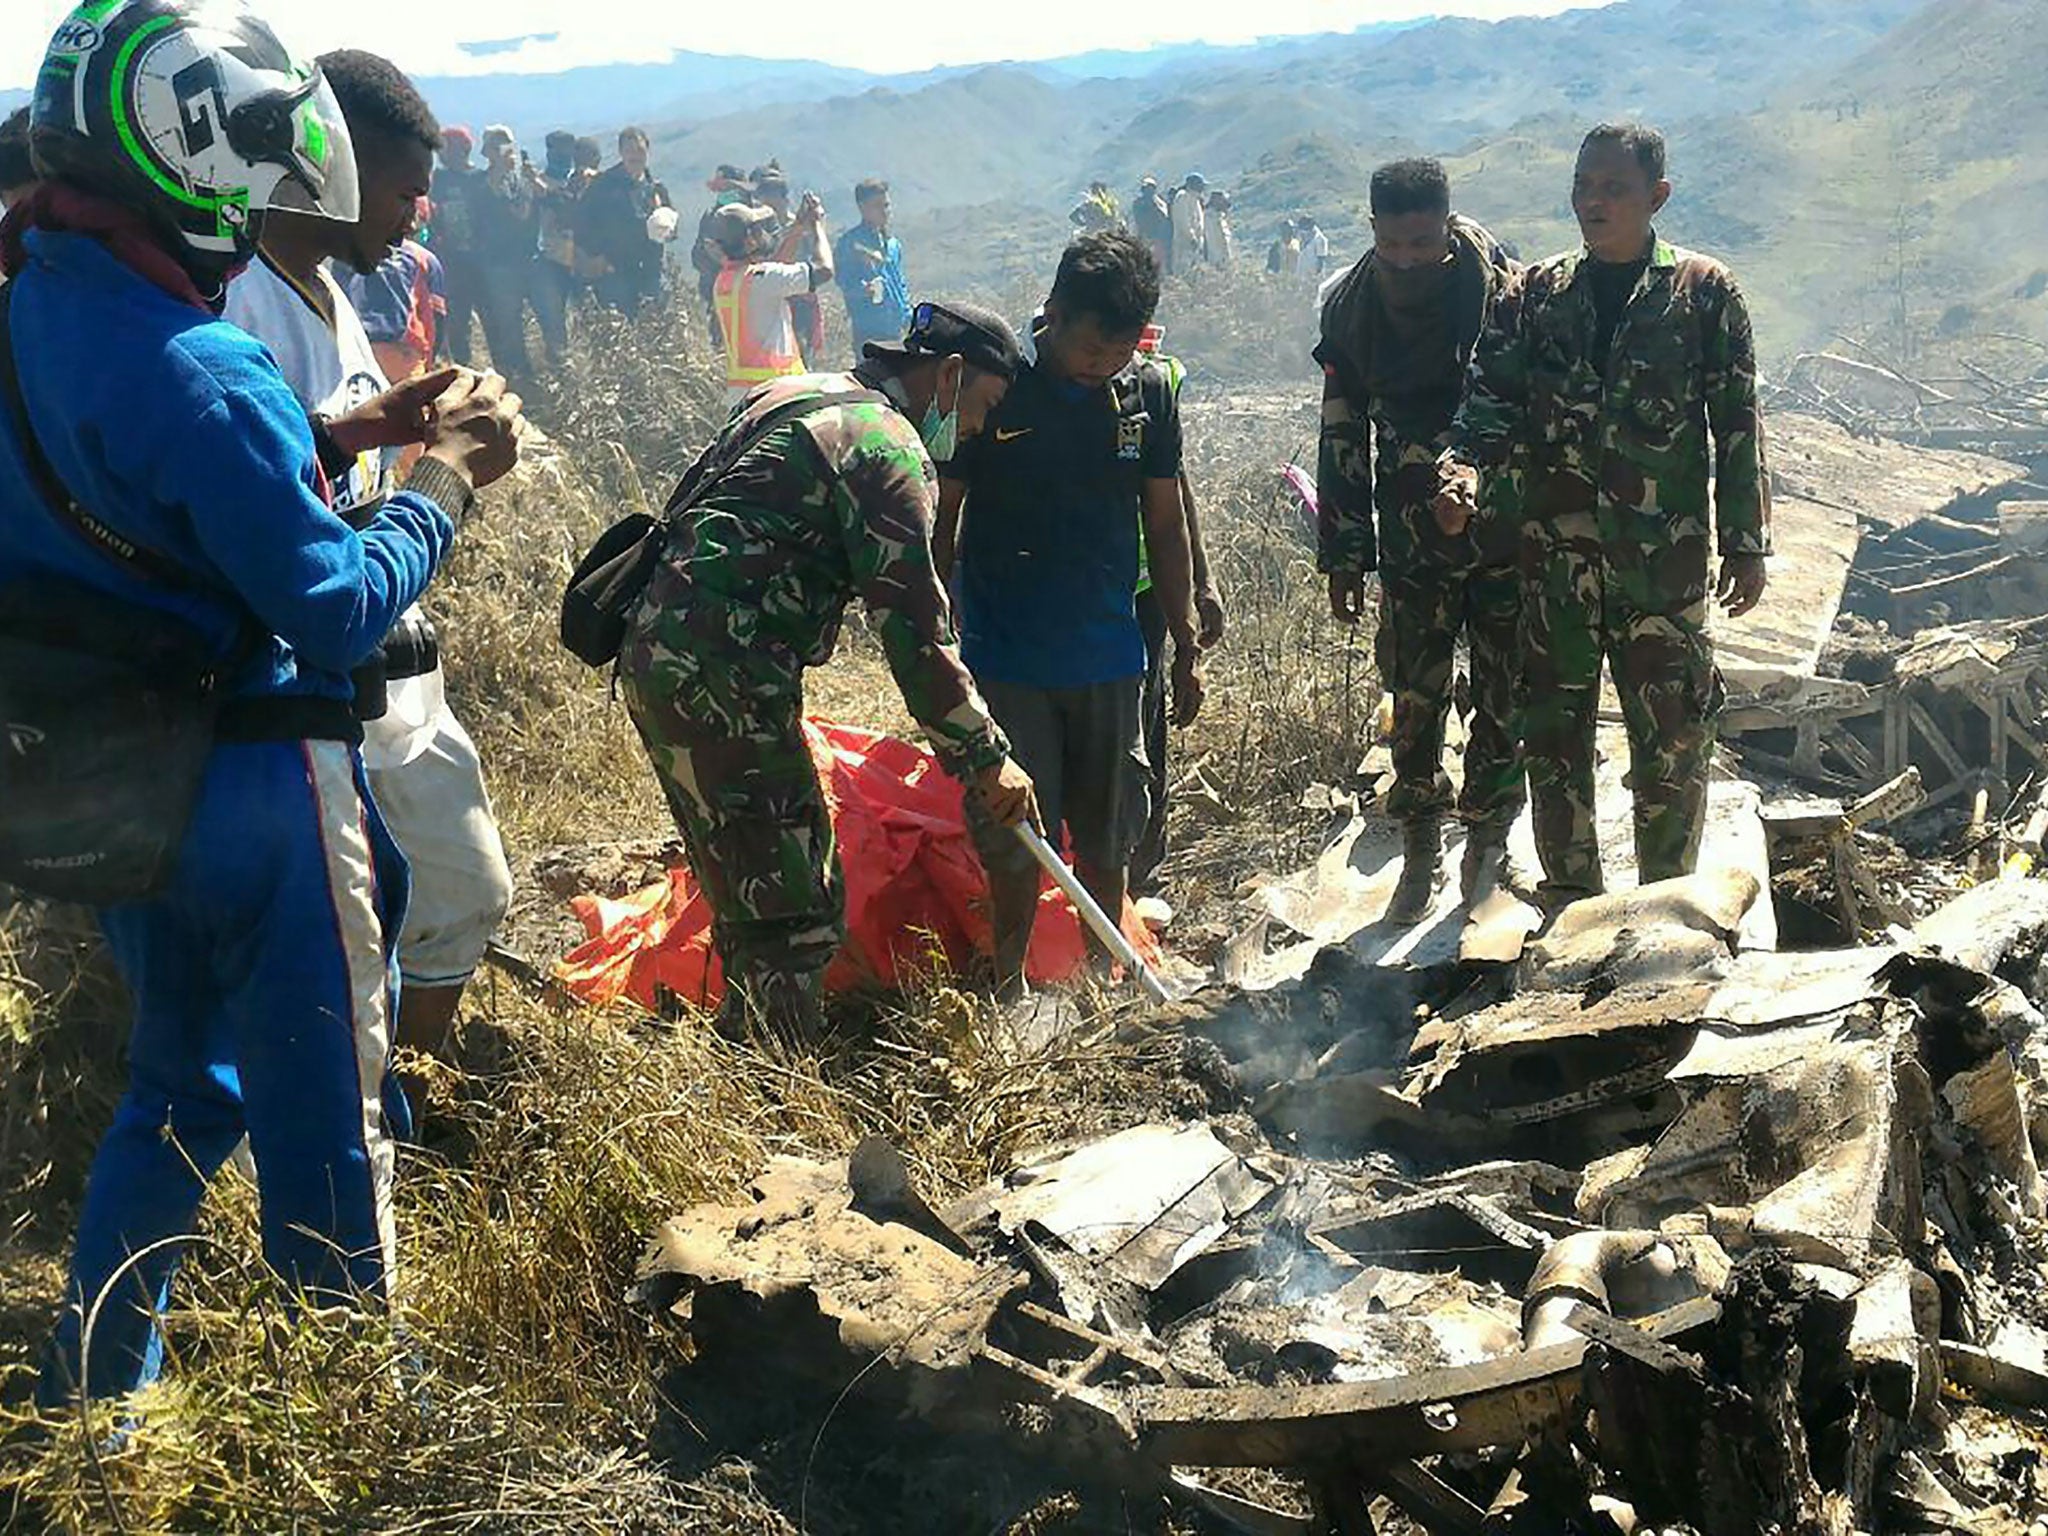 Indonesian soldiers examining the Hercules military plane A-1334 that crashed in Wamena